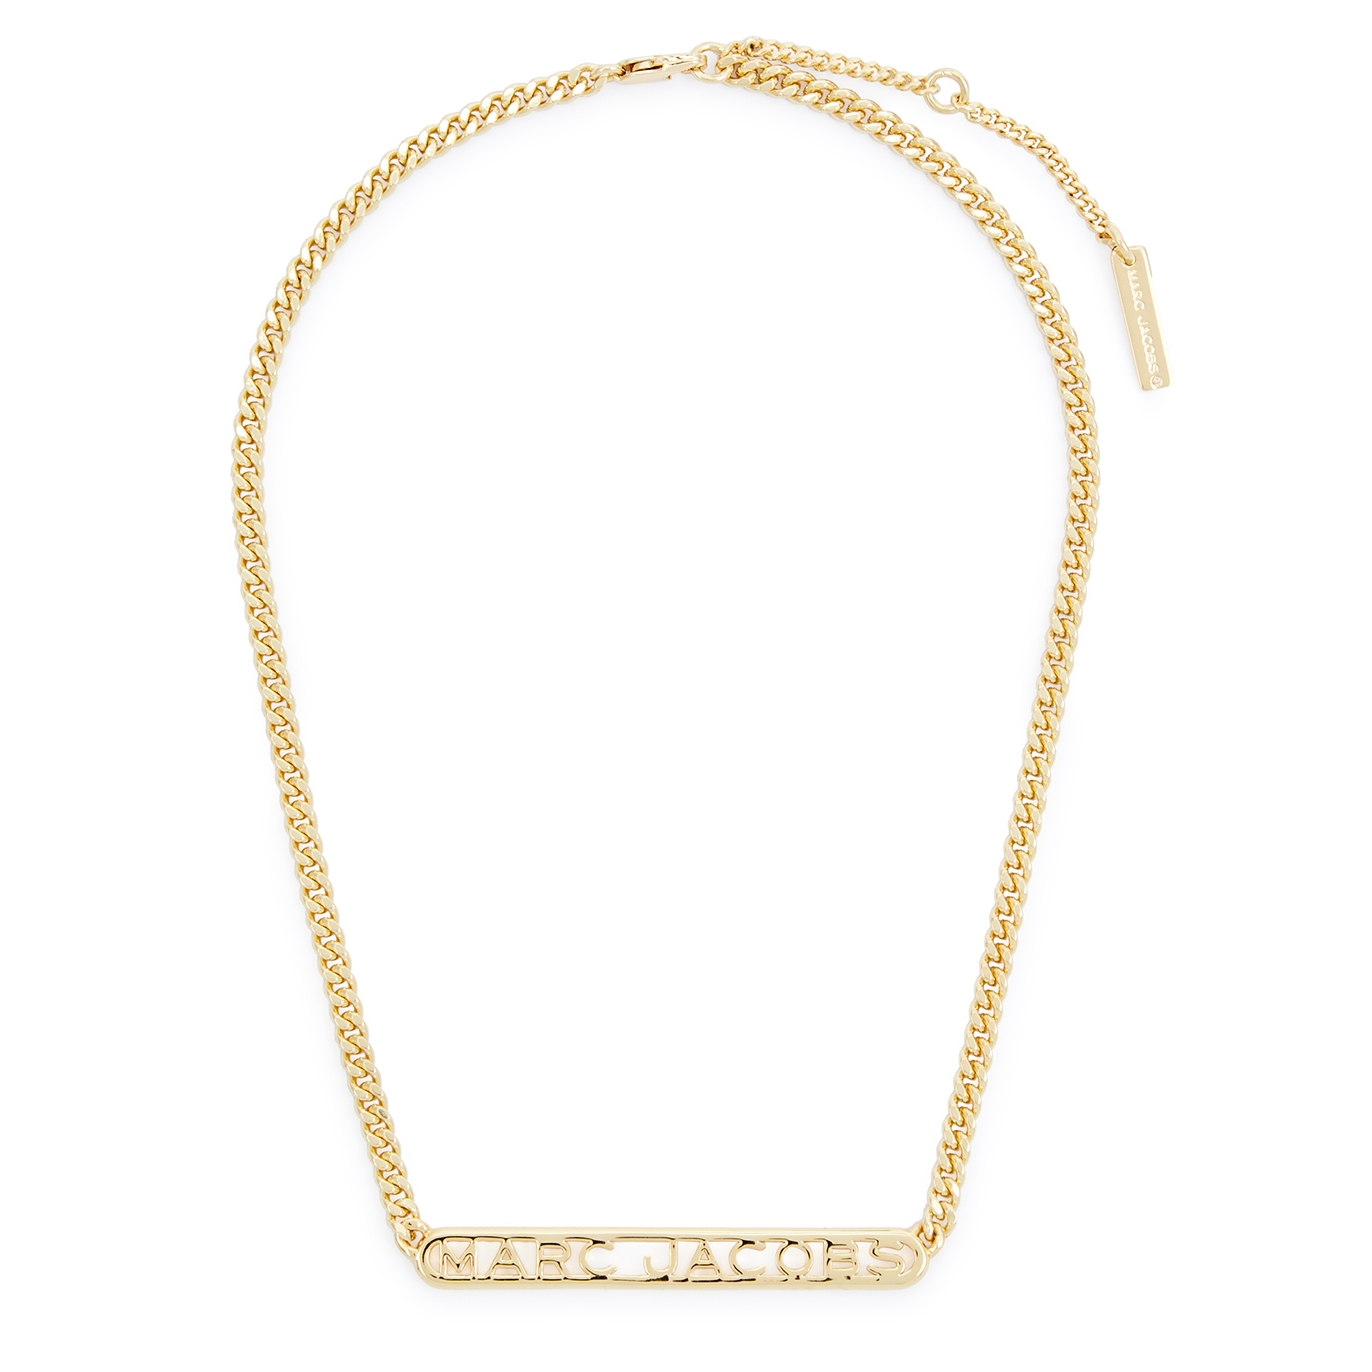 MARC JACOBS THE MONOGRAM CHAIN GOLD-PLATED NECKLACE